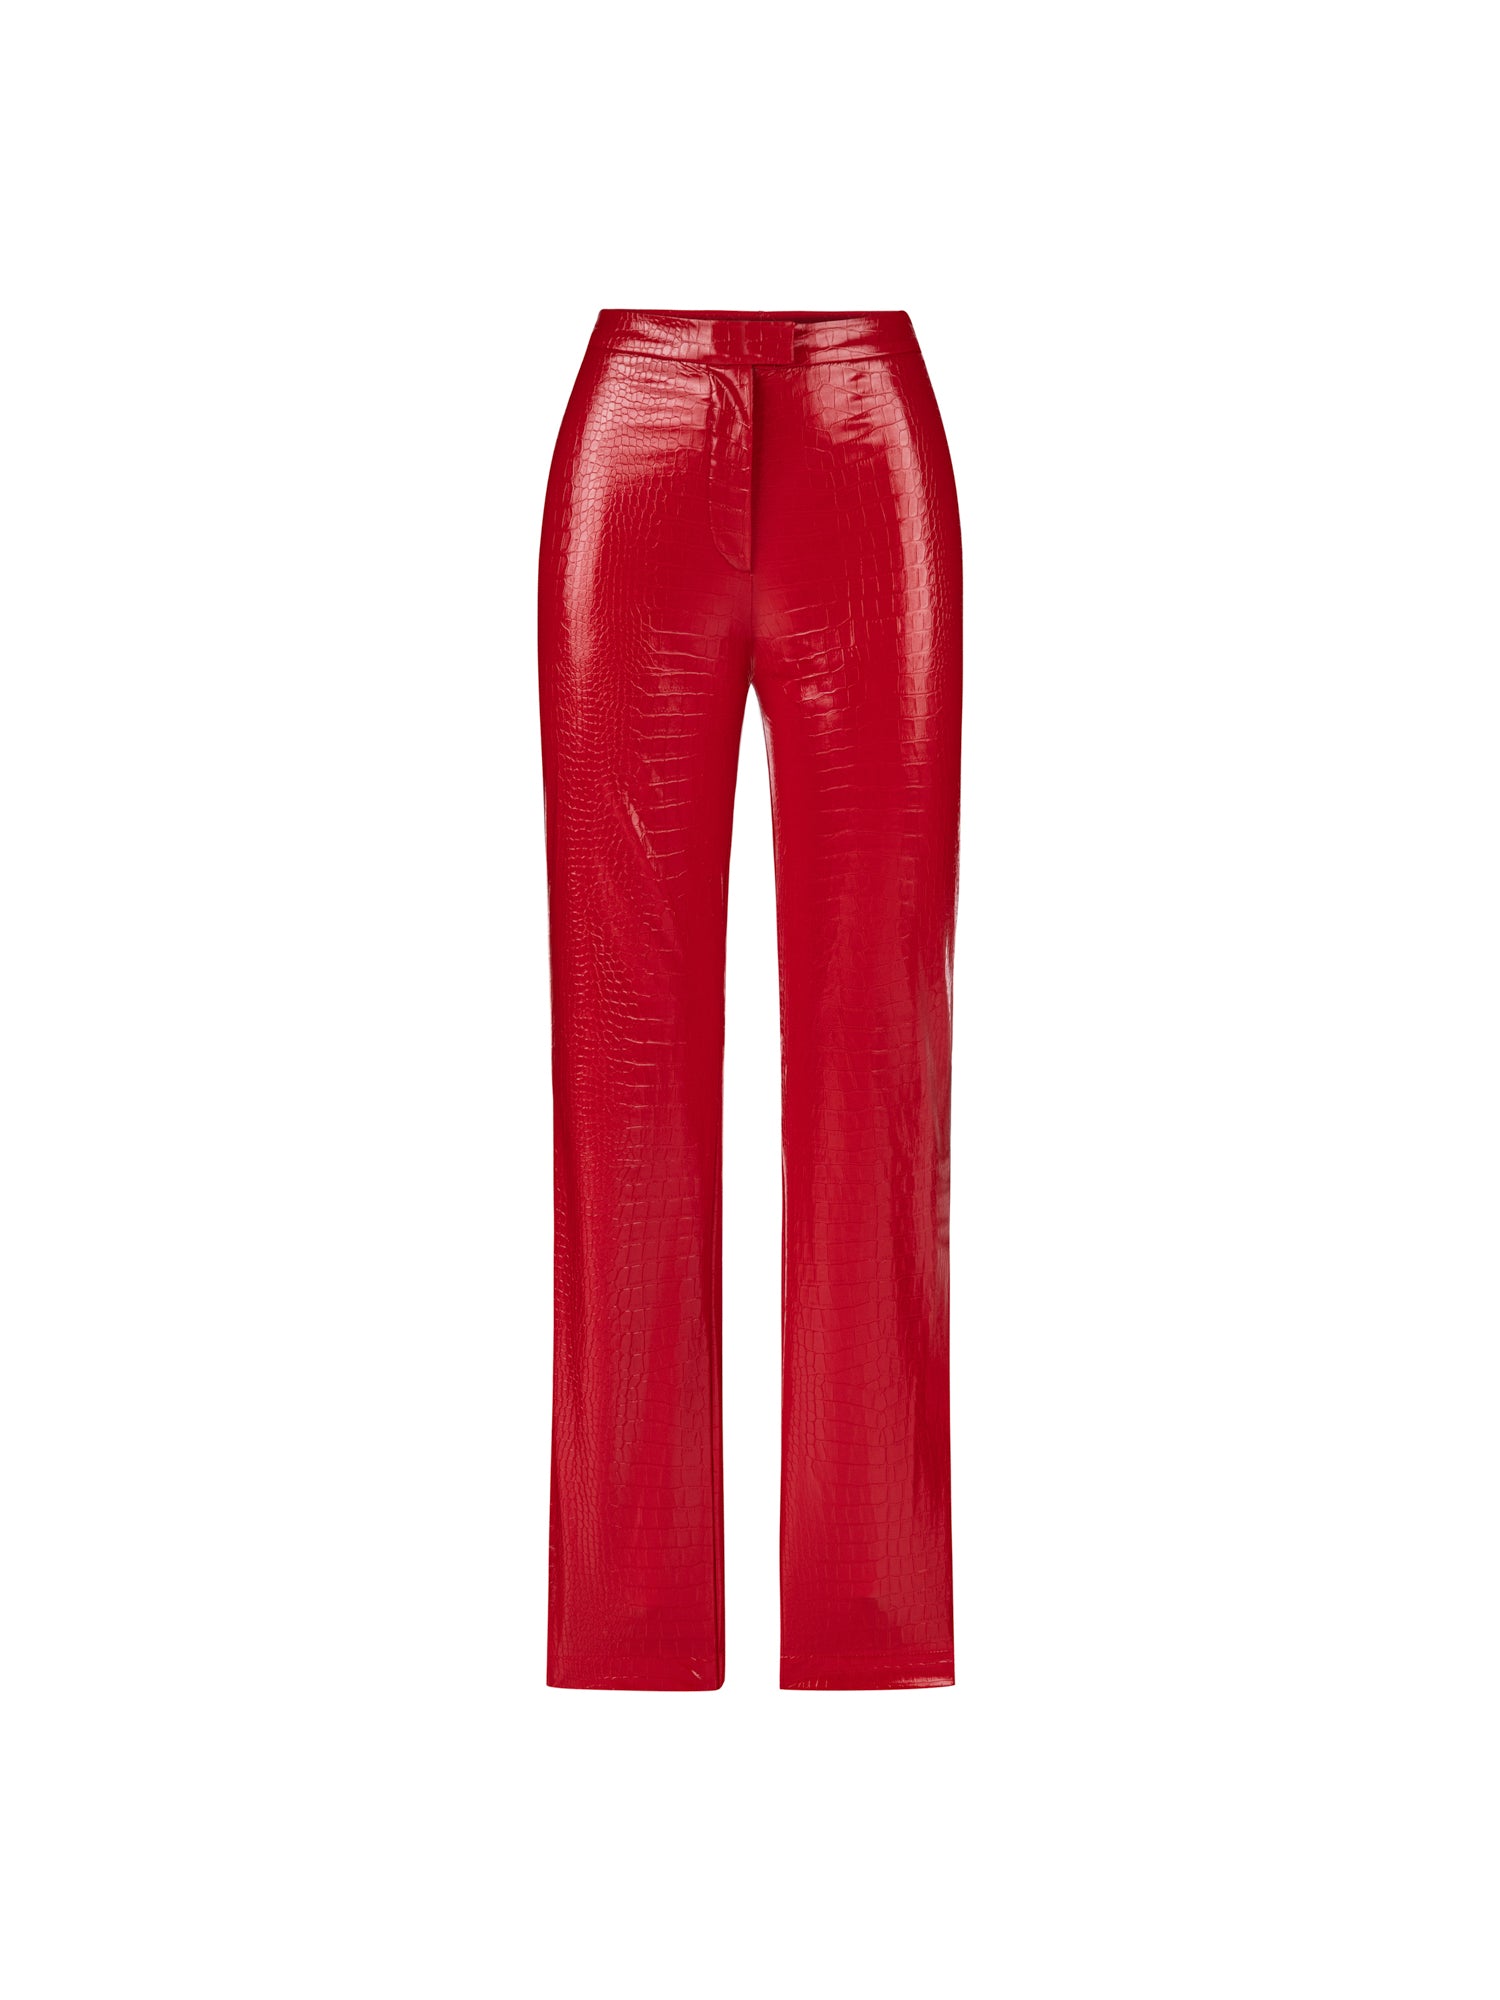 AMI in Shiny Red Leather Trousers